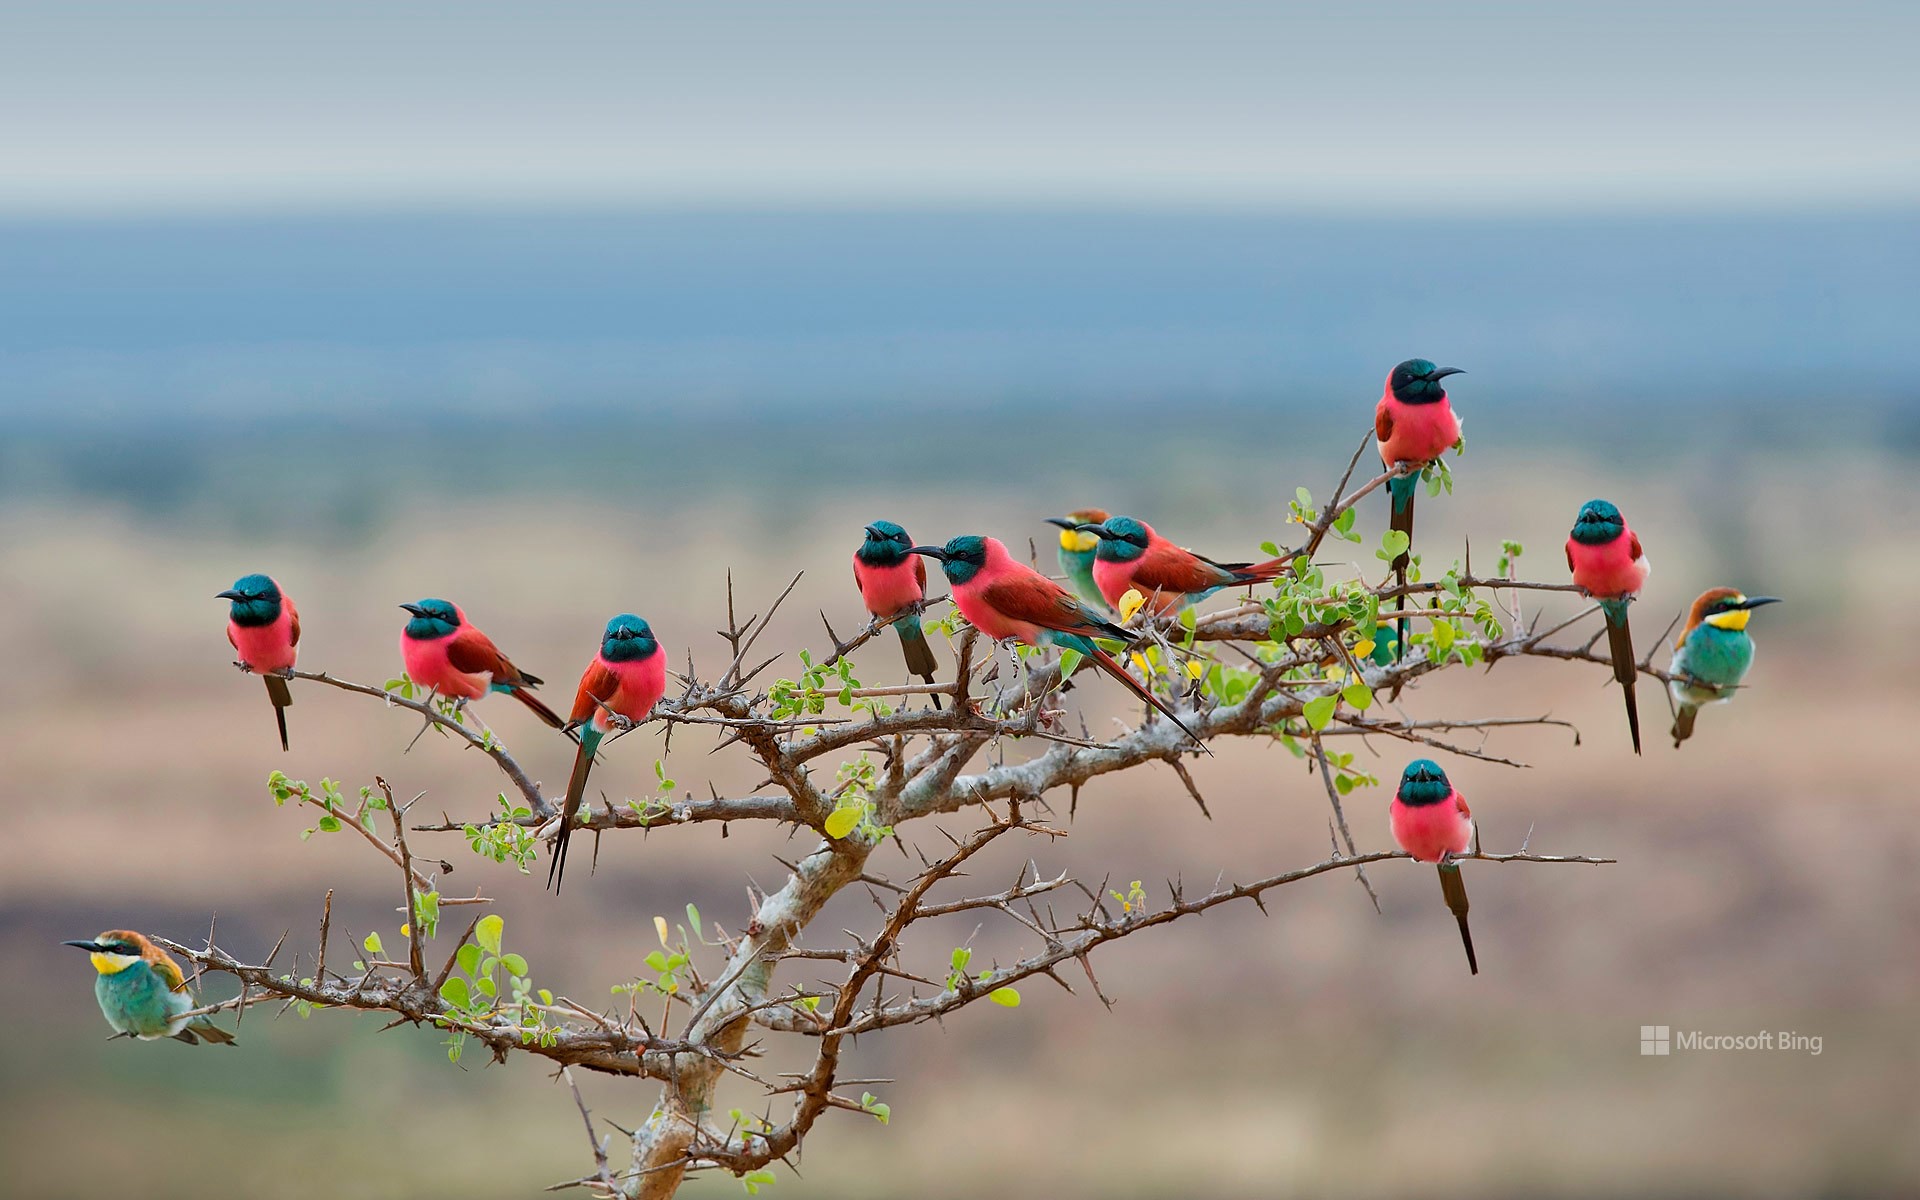 Northern carmine and European bee-eaters in Mkomazi National Park, Tanzania